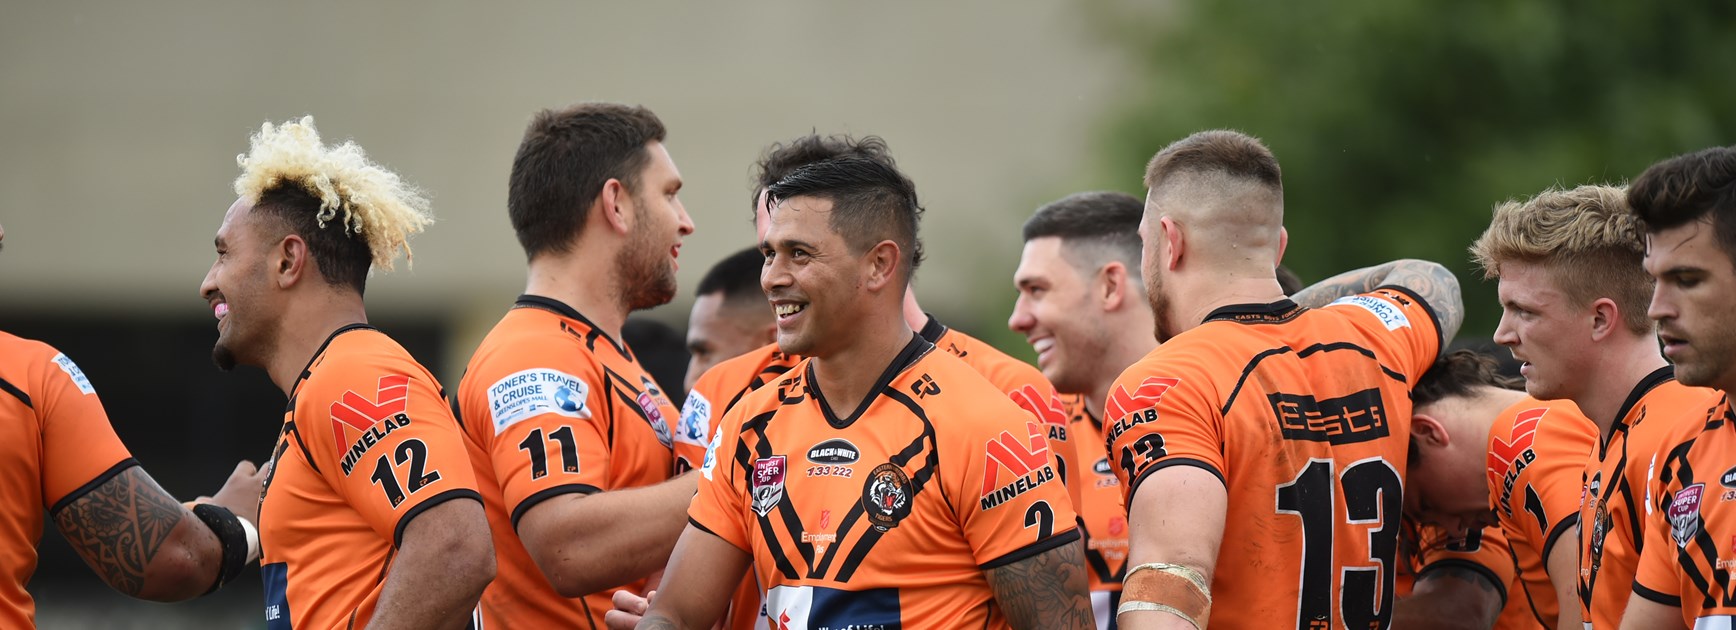 2018 Year in Review: Easts Tigers